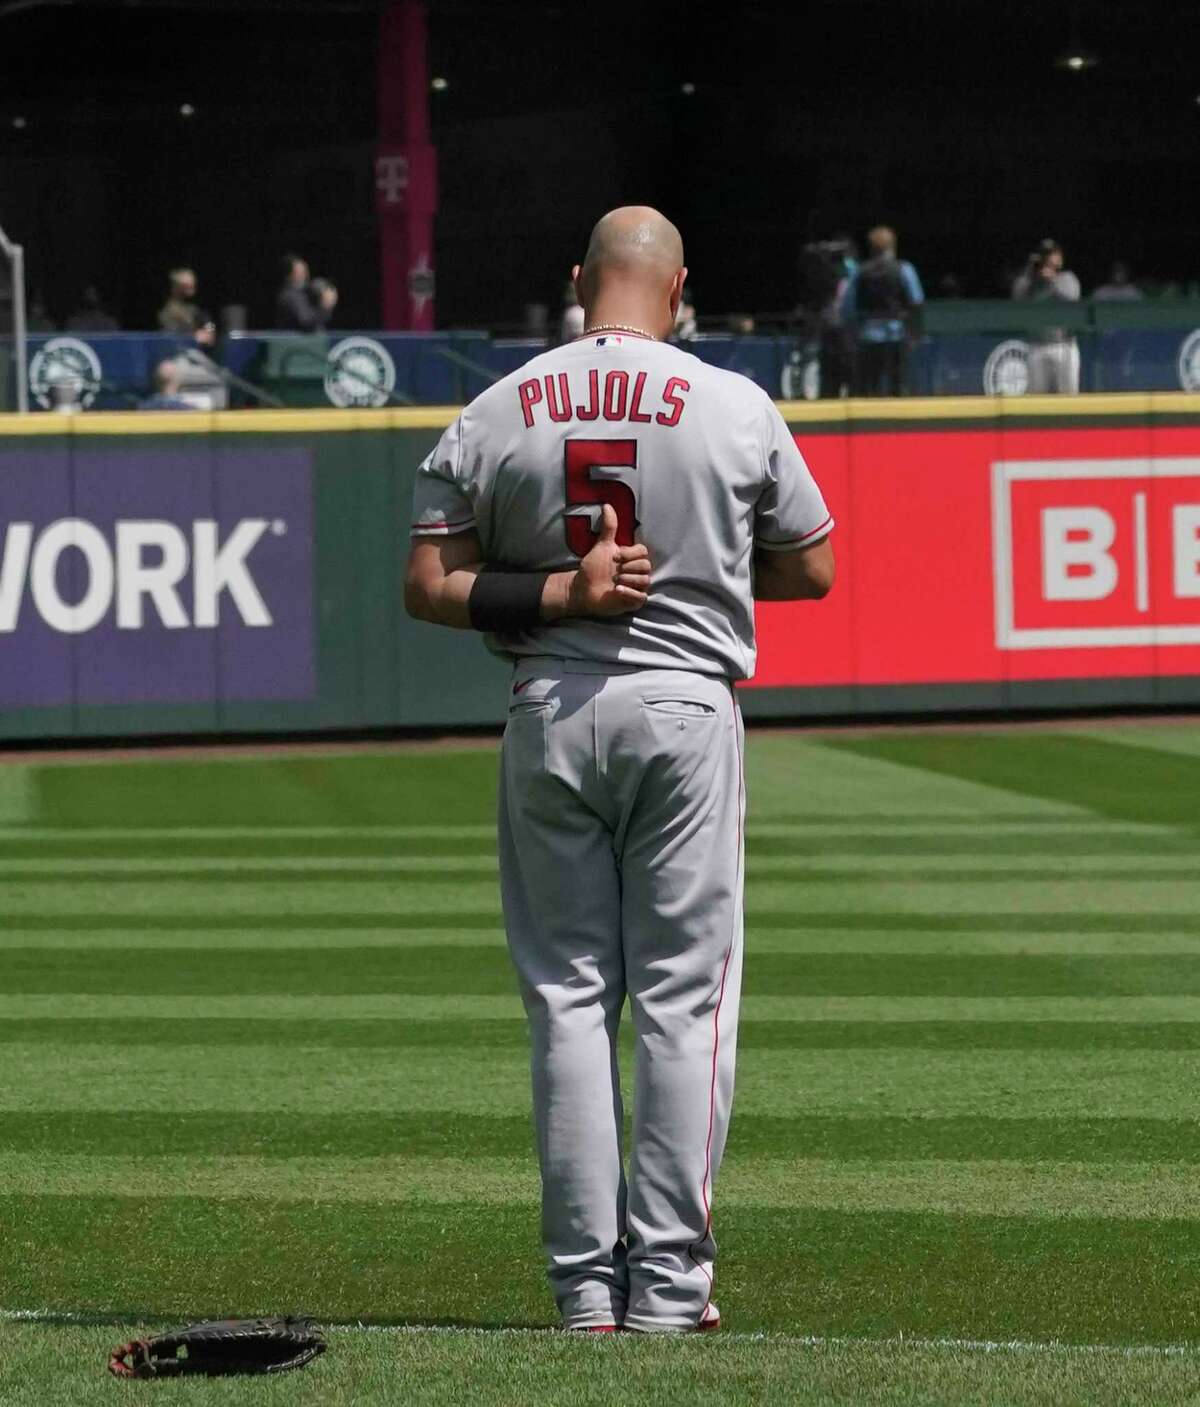 Los Angeles Angels' Albert Pujols stands during the national anthem, before a baseball game against the Seattle Mariners, Sunday, May 2, 2021, in Seattle. (AP Photo/Ted S. Warren)